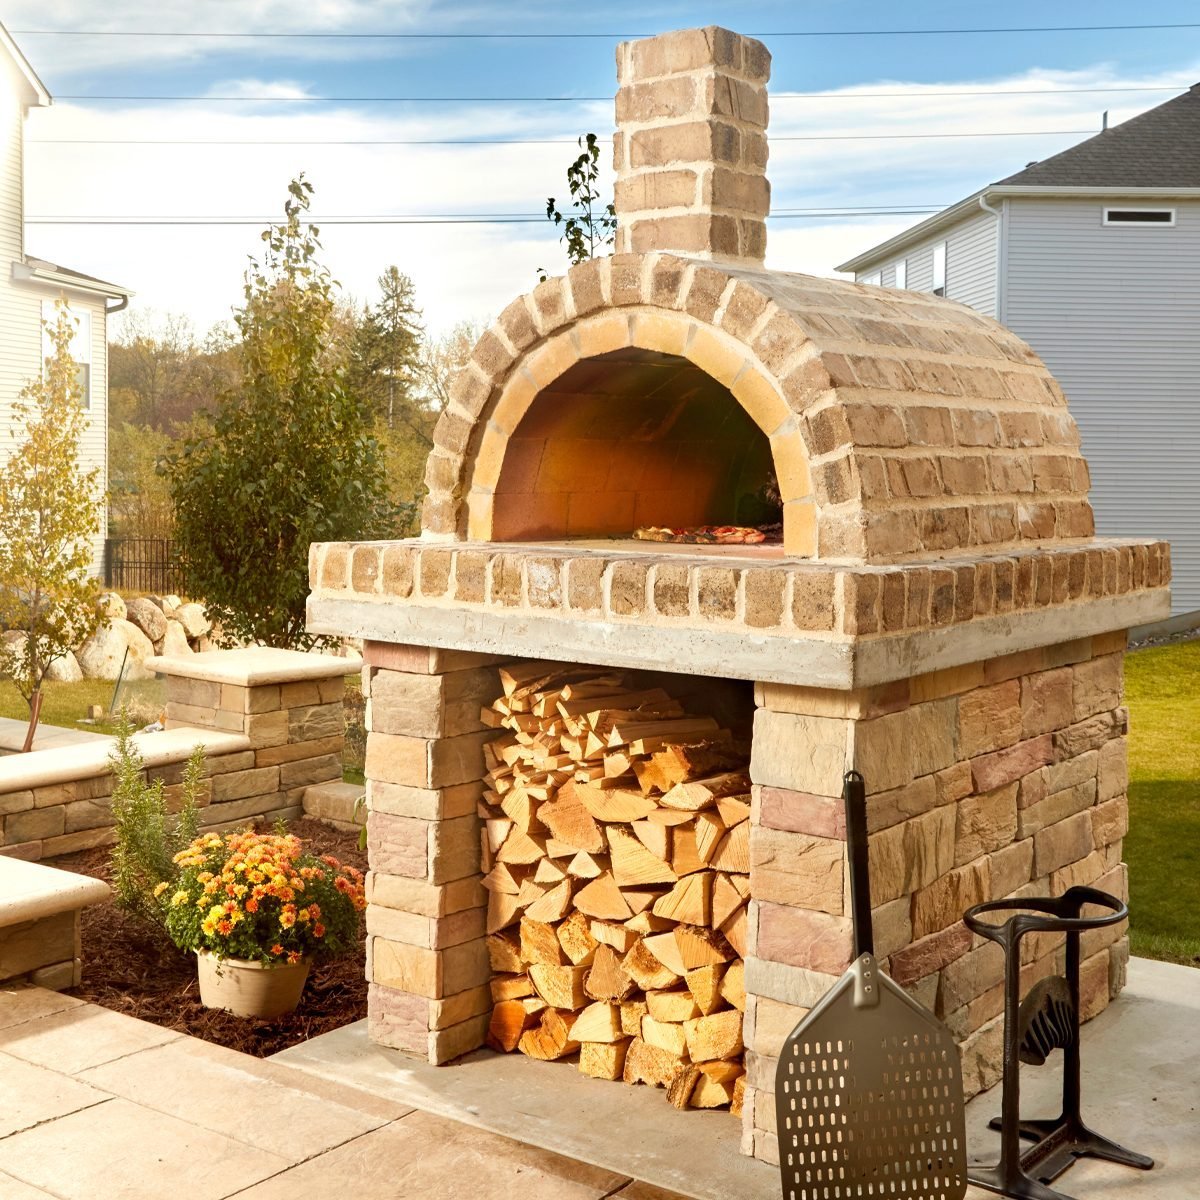 How to Build a Brick Pizza Oven